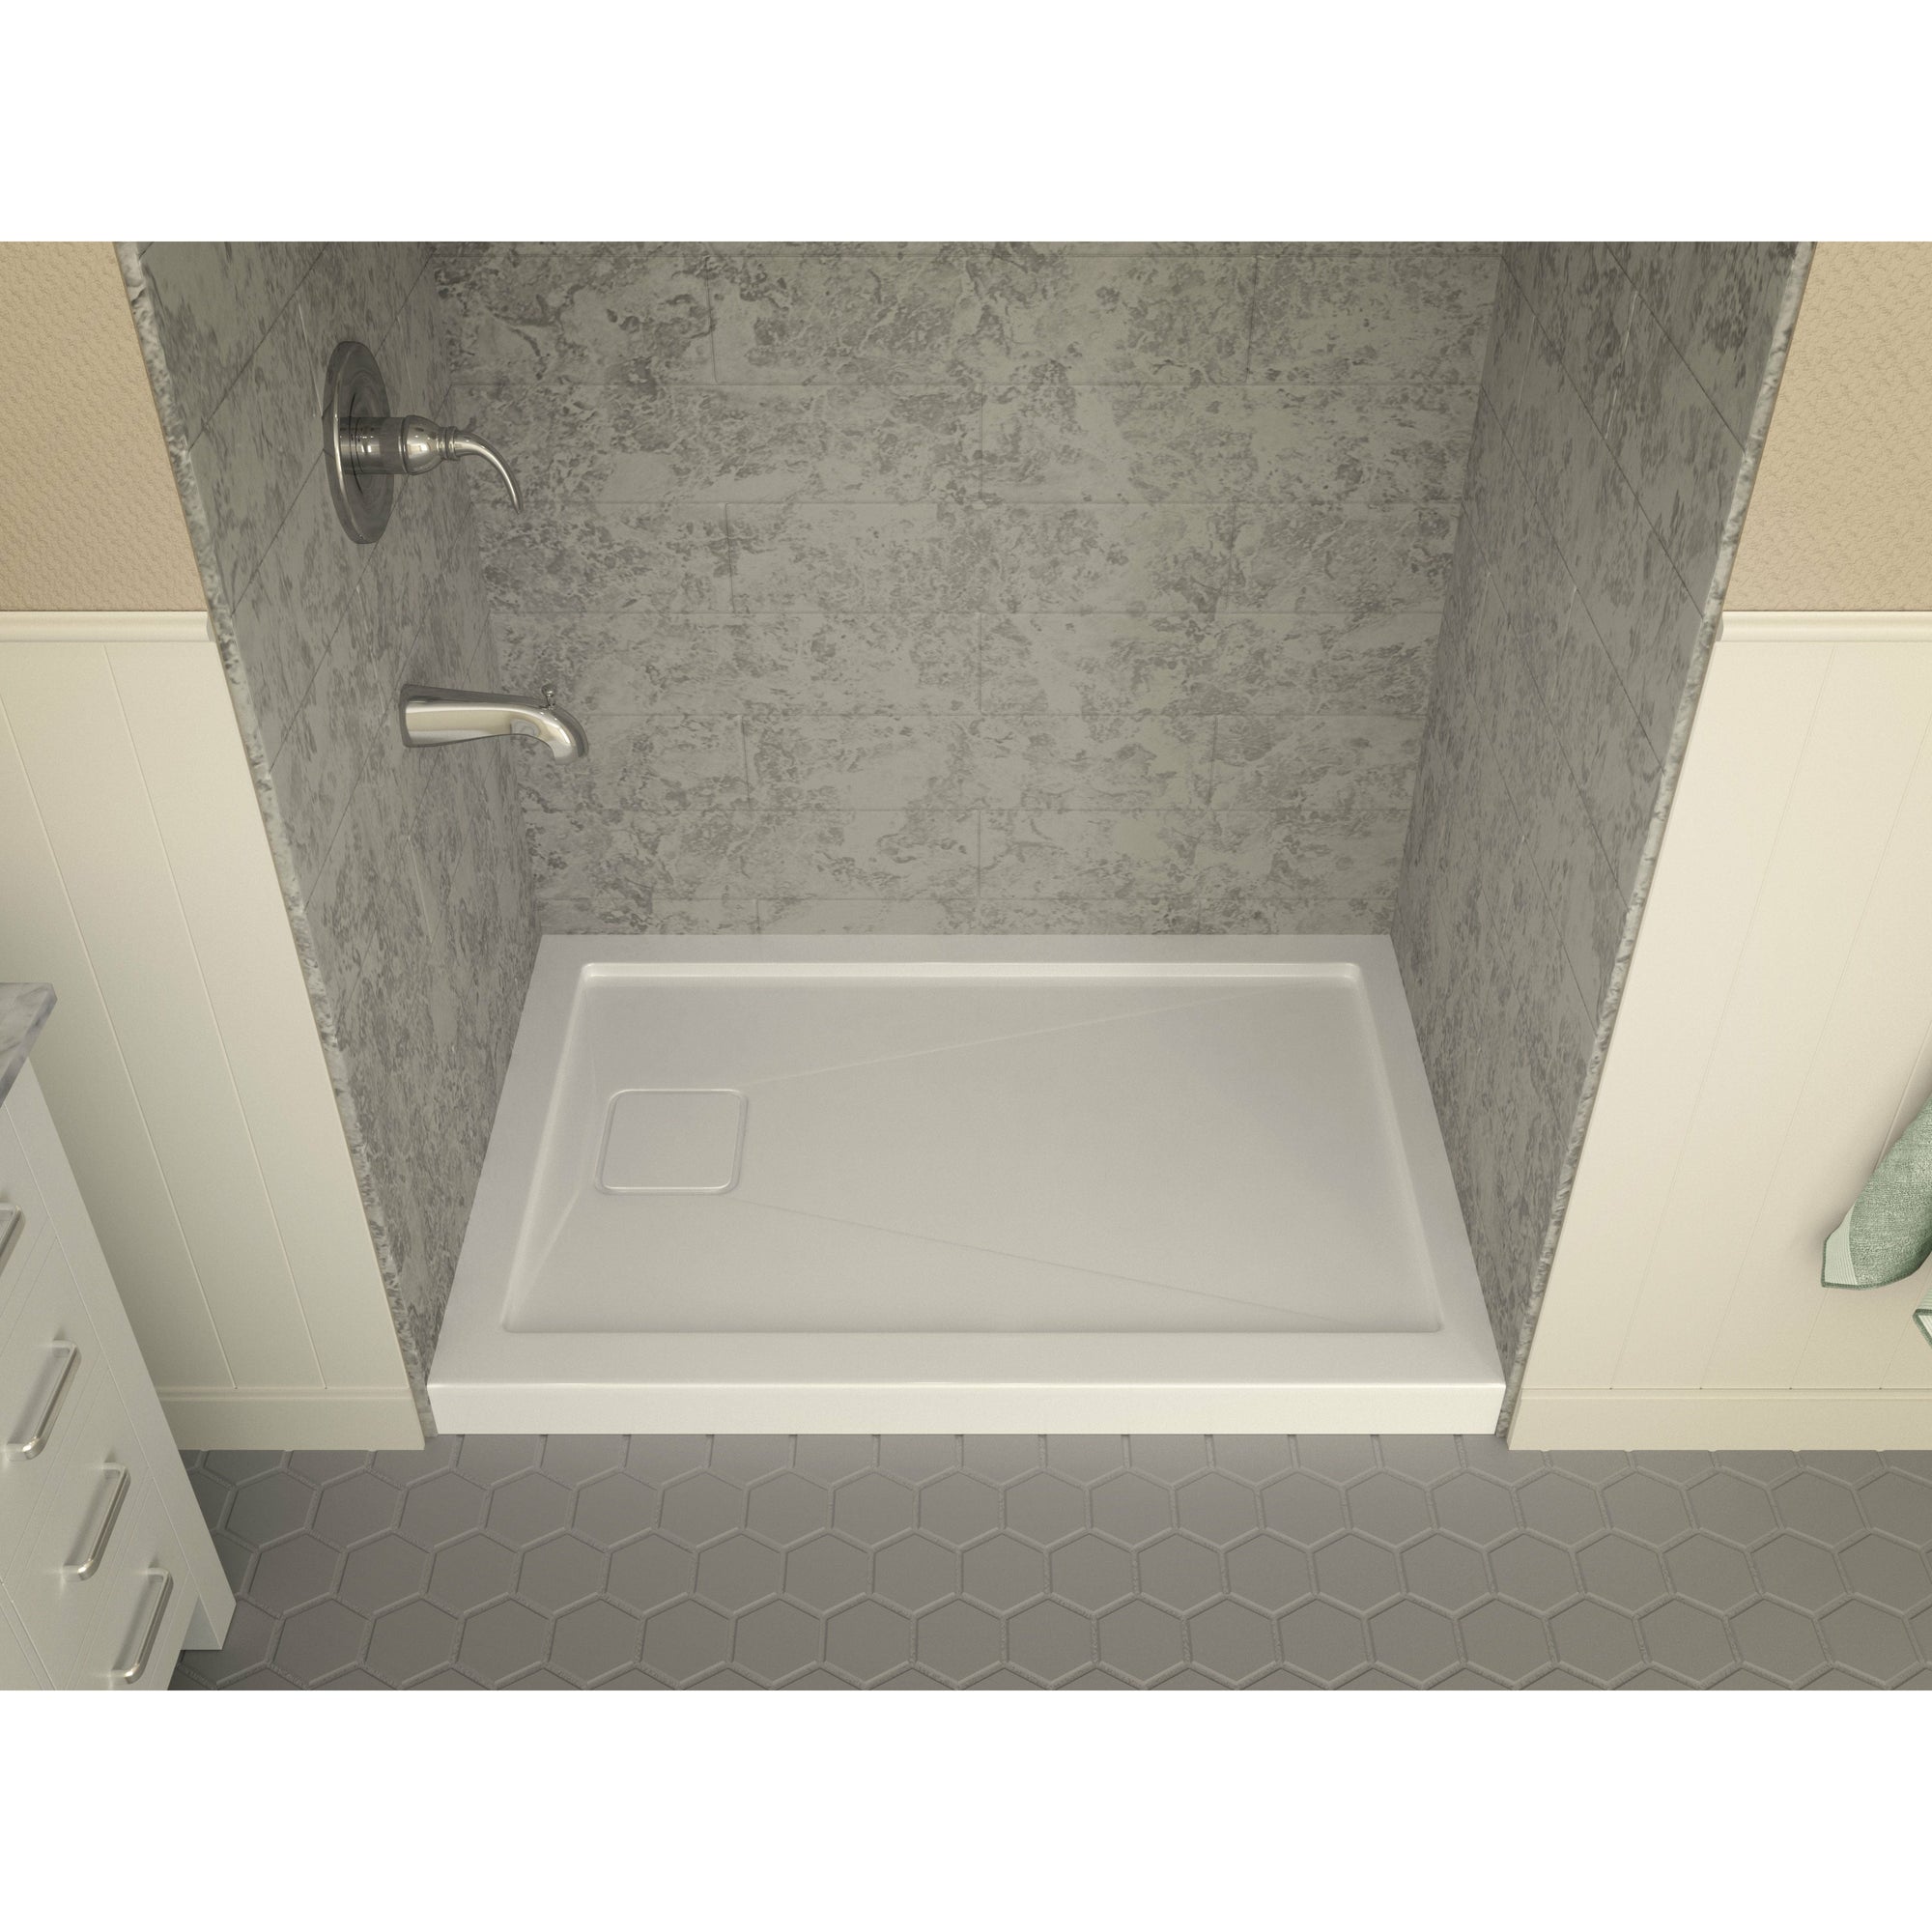 Anzzi Forum Series 48 in. x 32 in. Shower Base in Marine Grade Acrylic in Bright and Vibrant White Finish - Rectangular Shape - SB-AZ015WV - Vital Hydrotherapy